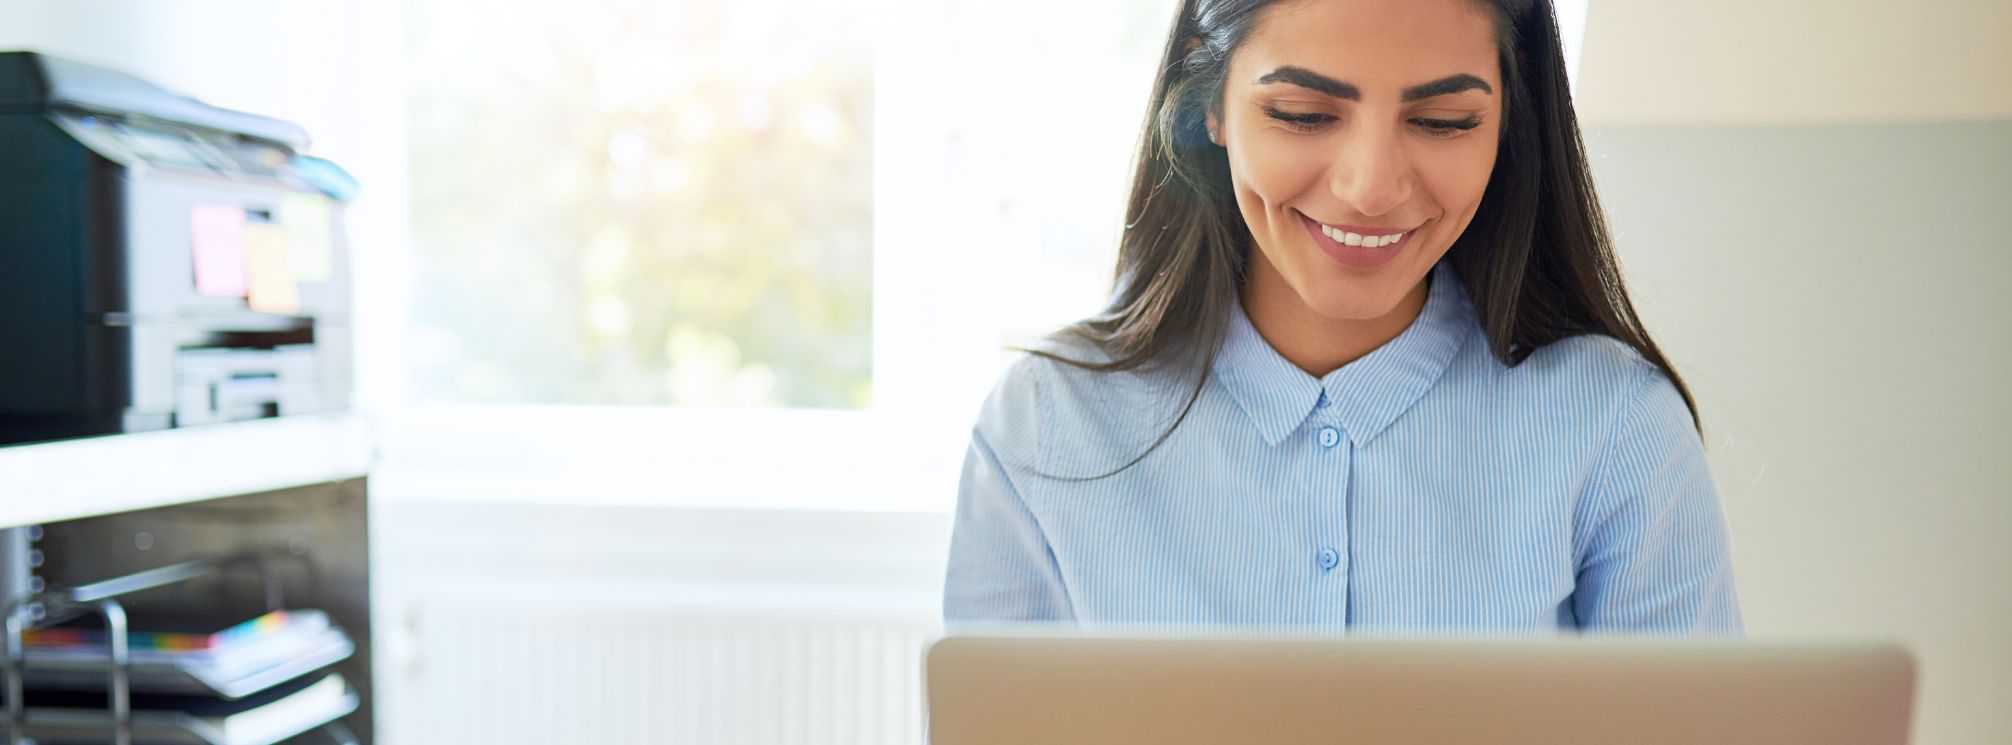 A female employee smiling and engaged in her work on her laptop.